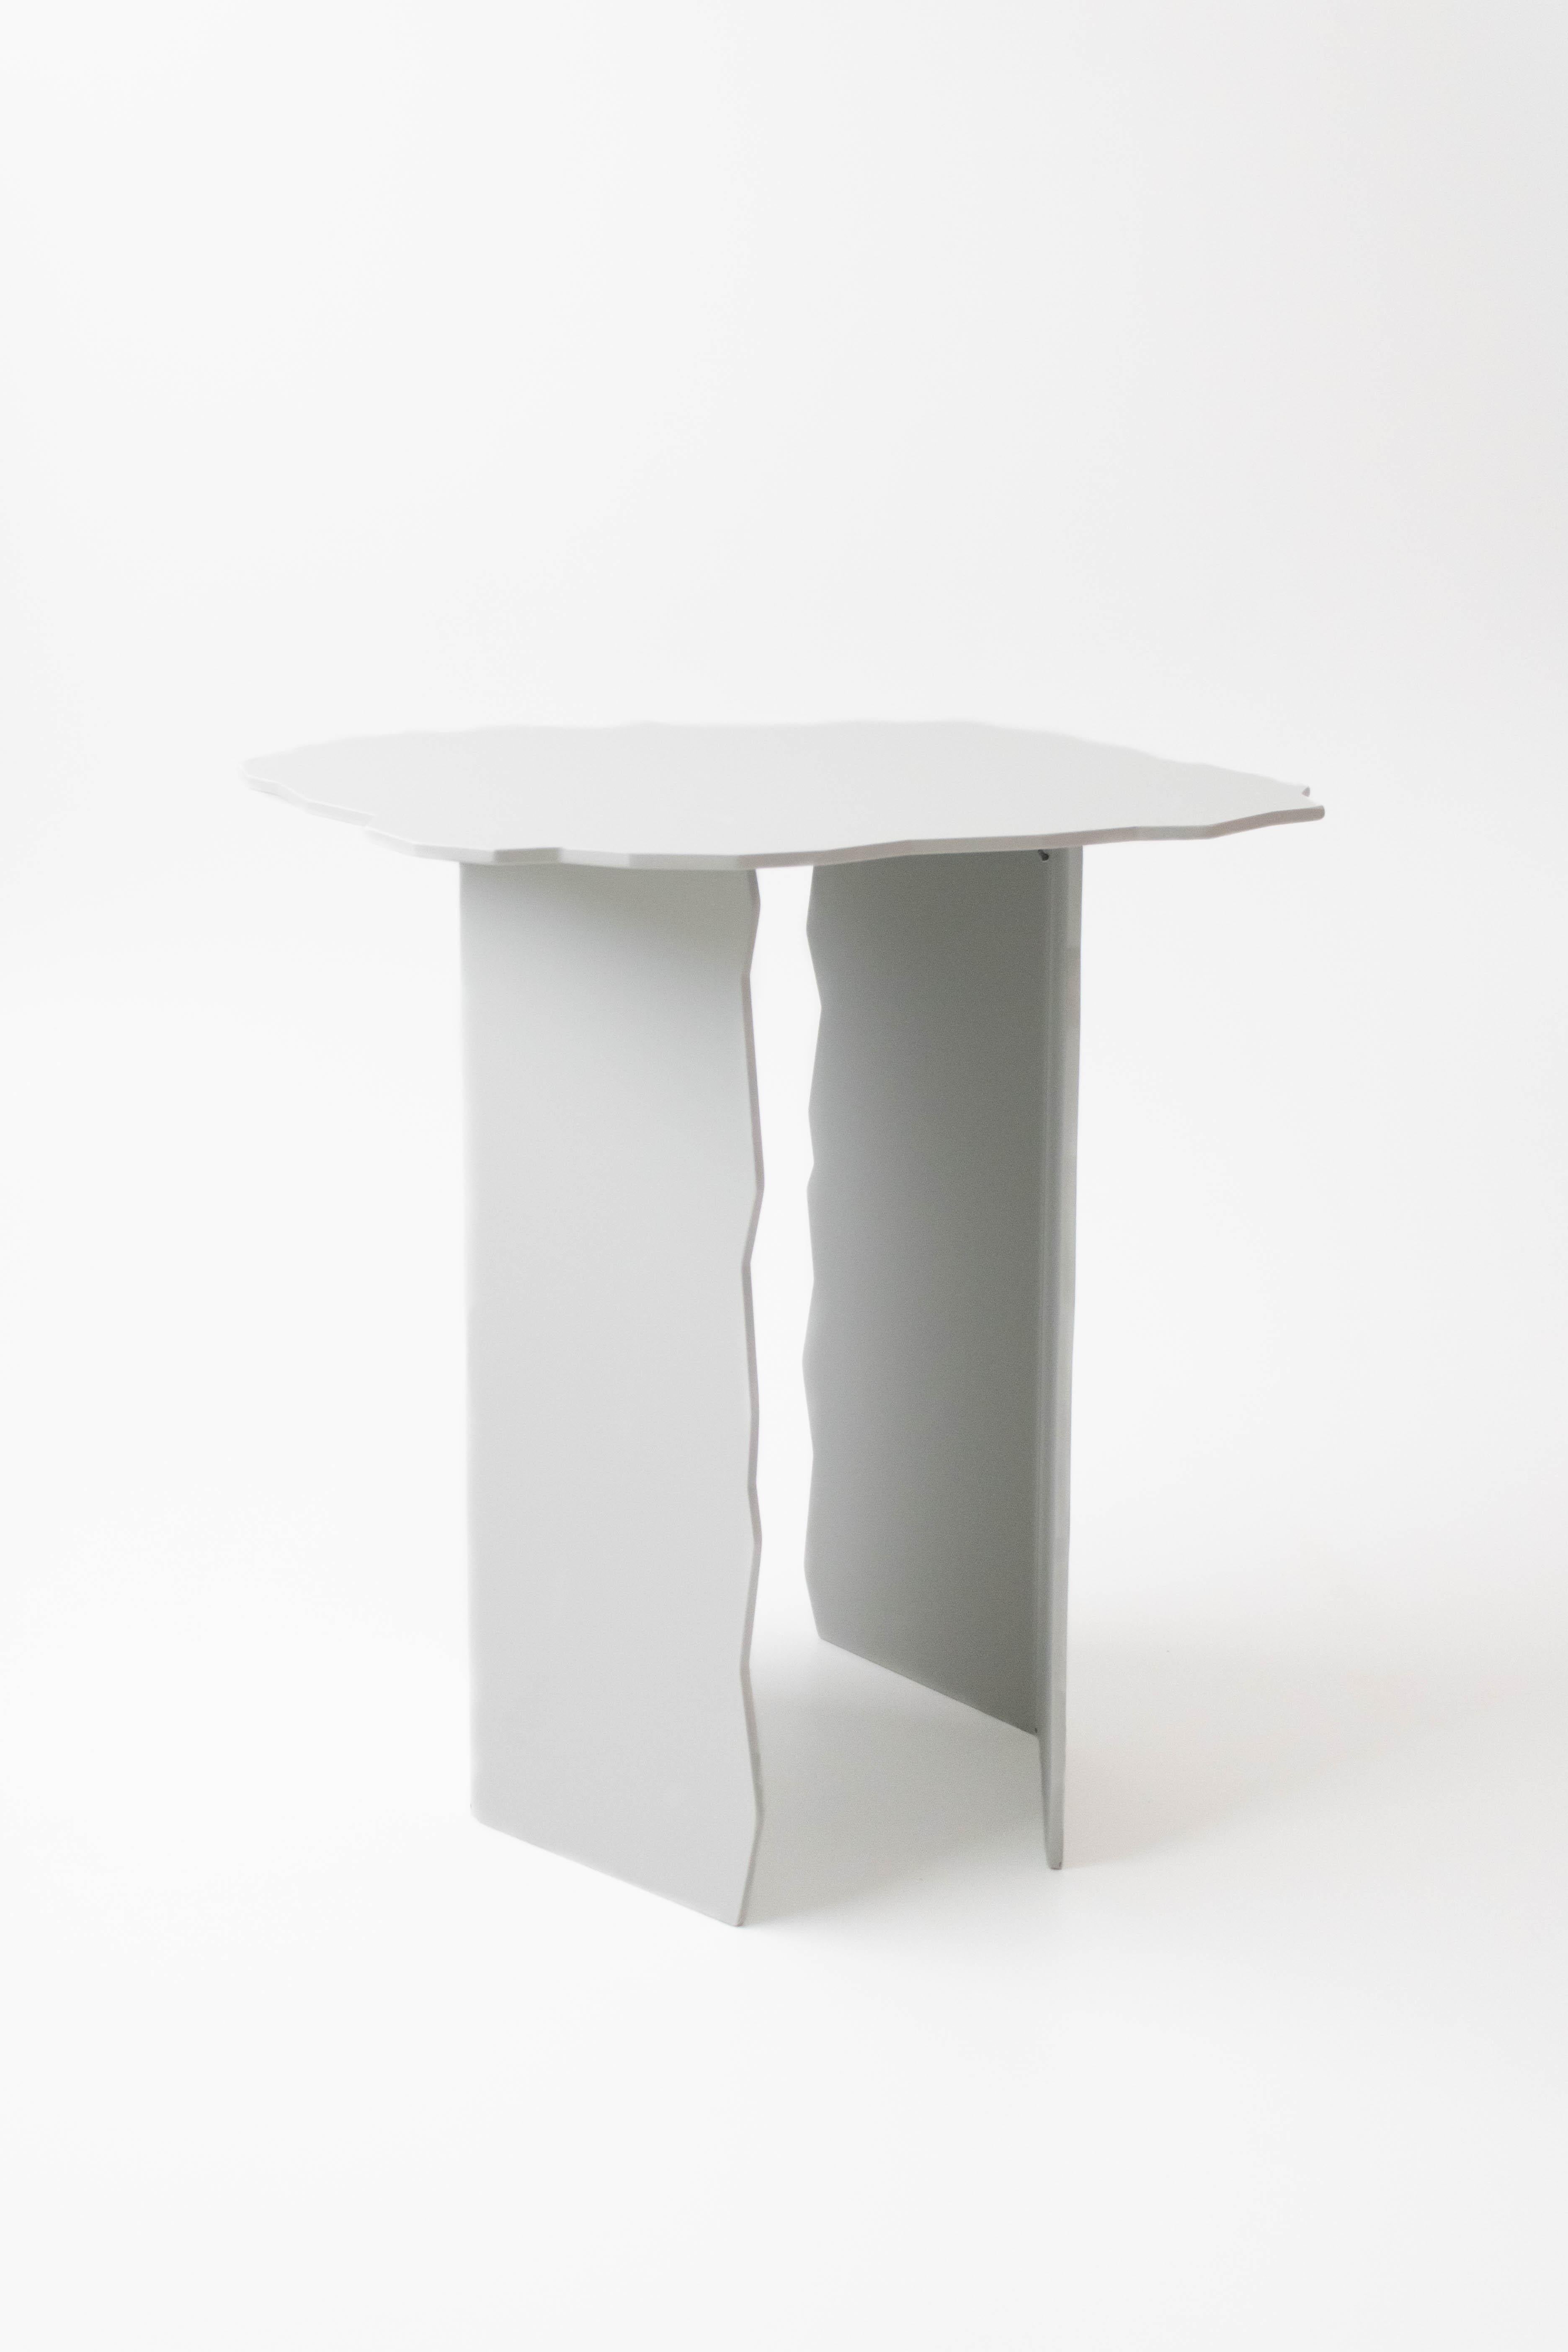 Disrupt Tall Table by Arne Desmet
Dimensions: D44 x W44 x H46 cm
Materials: Powder coated aluminium.
Other colours available on request.

The shapes of the Disrupt tables are inspired by the jagged edges formed by earth cracks. By means of